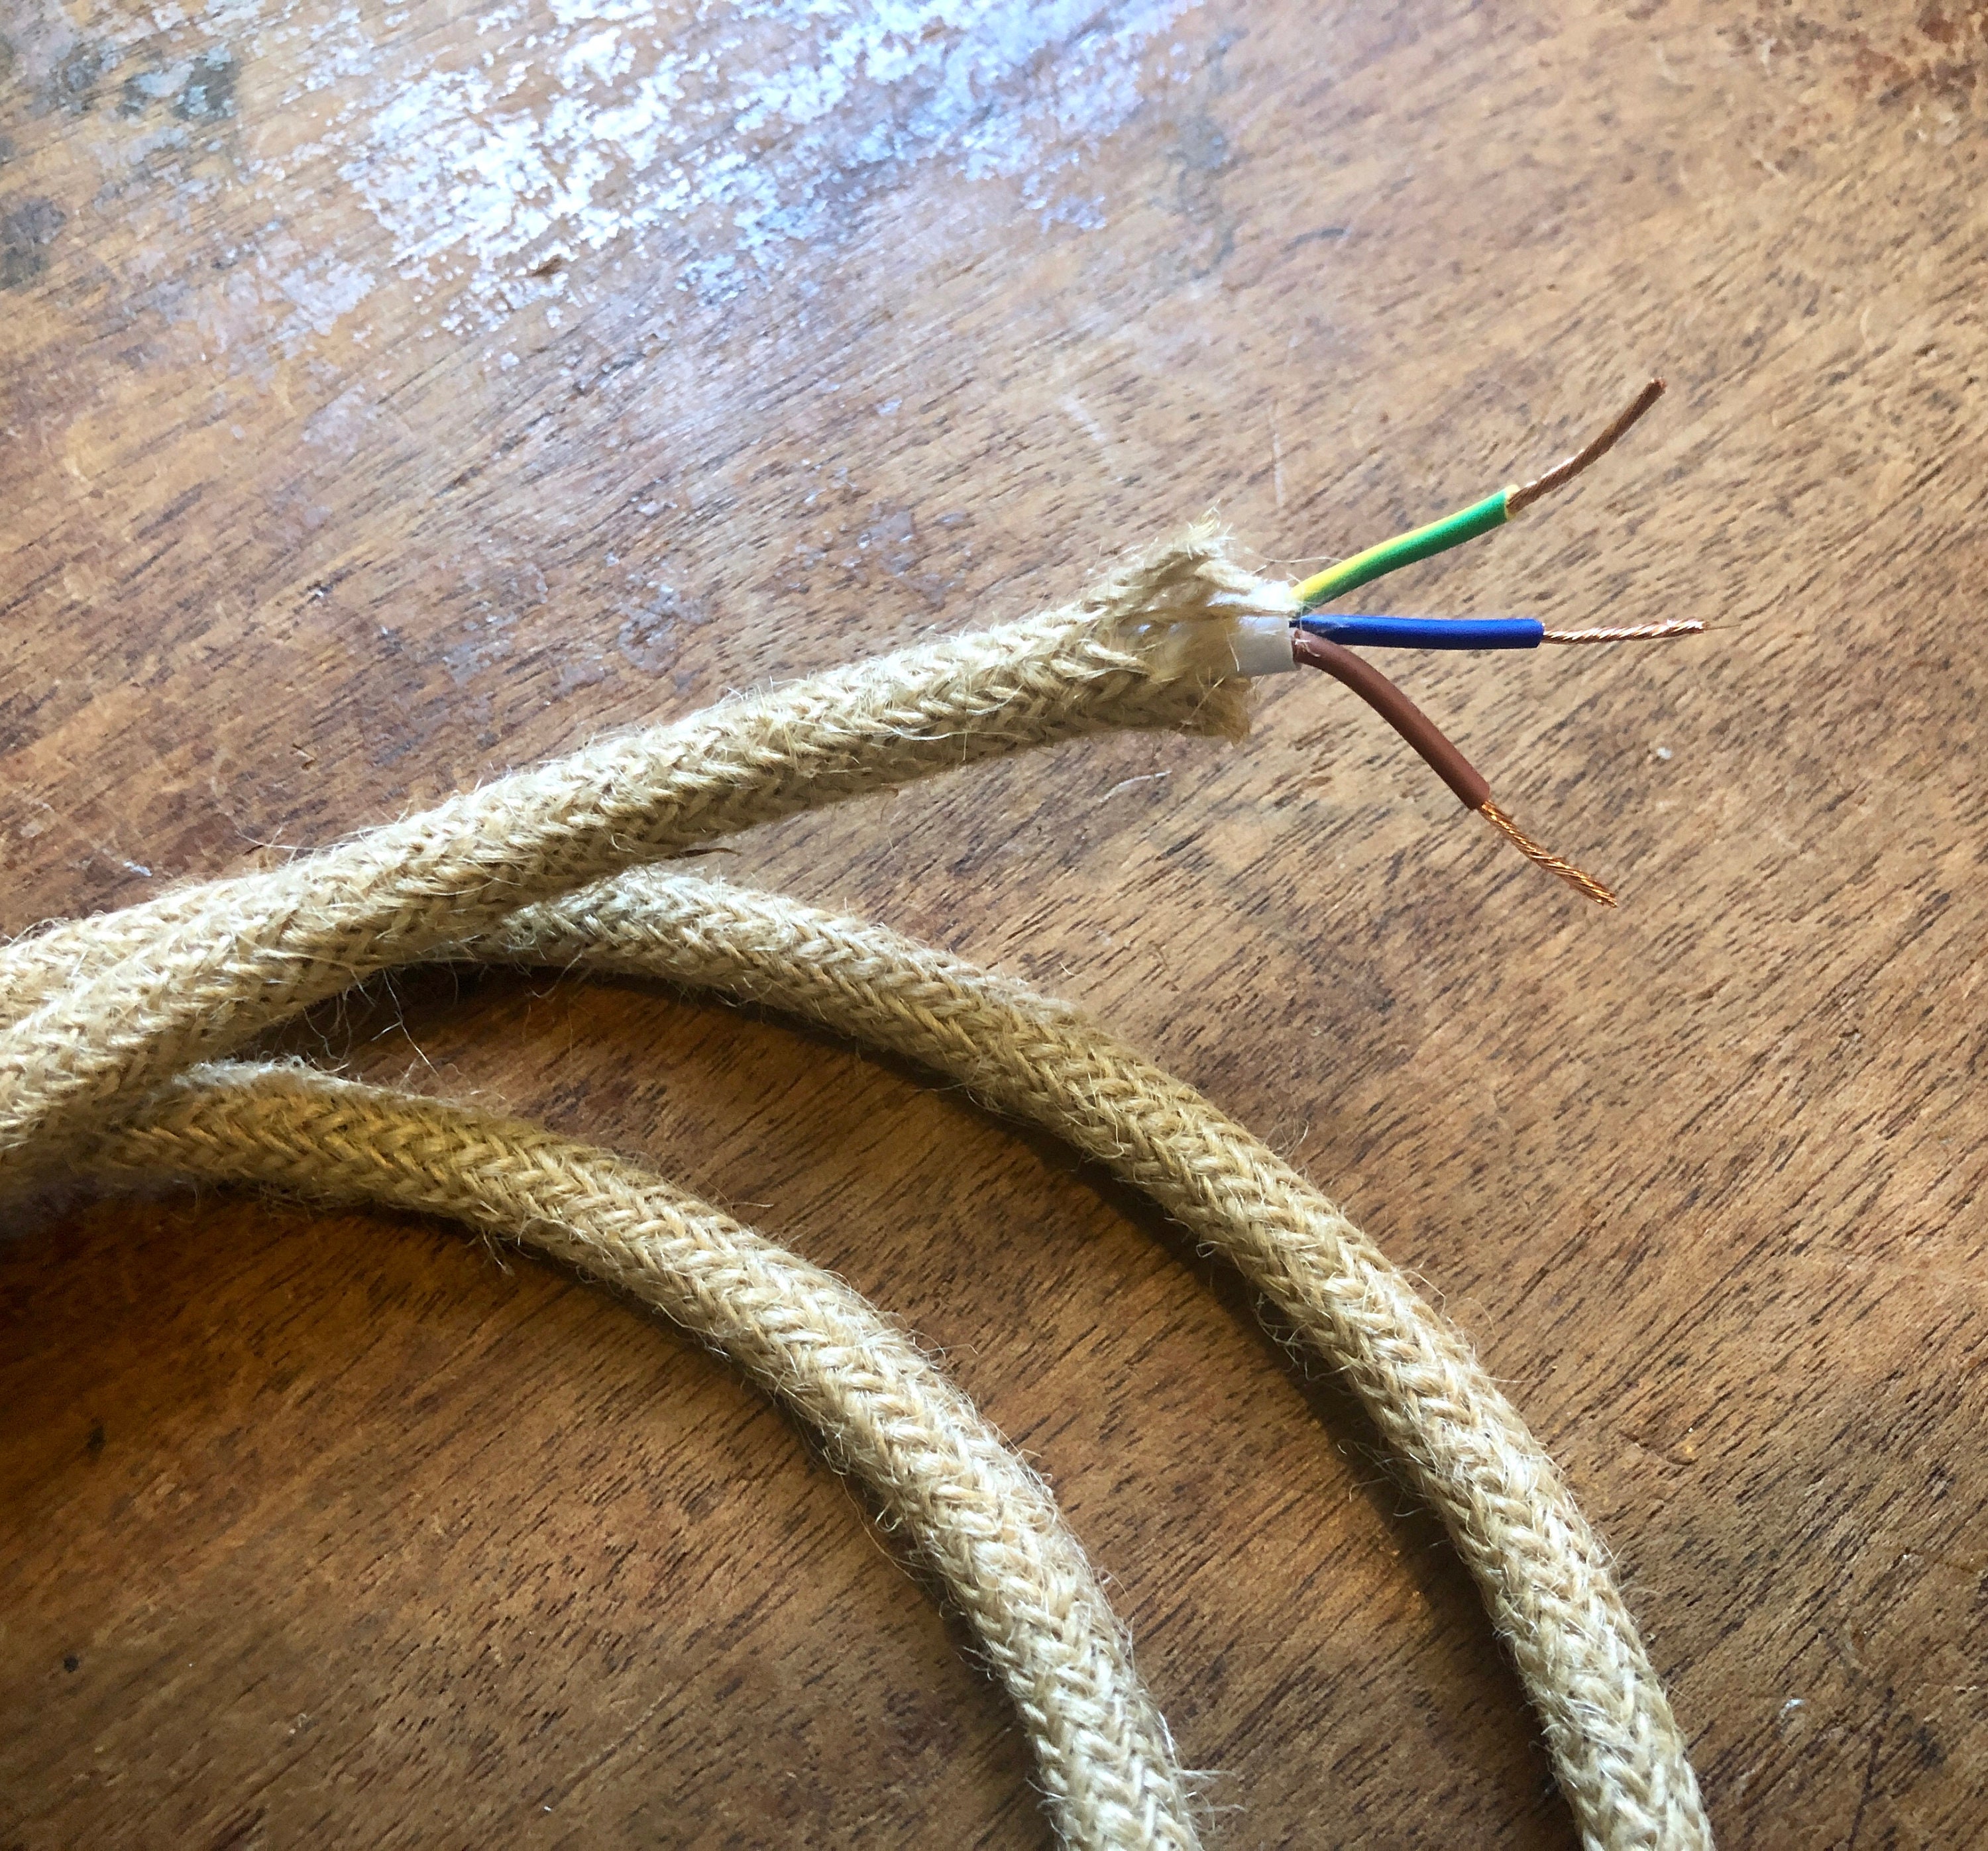 Jute Covered (Rope Style) 2-wire Round Cord - PER FOOT